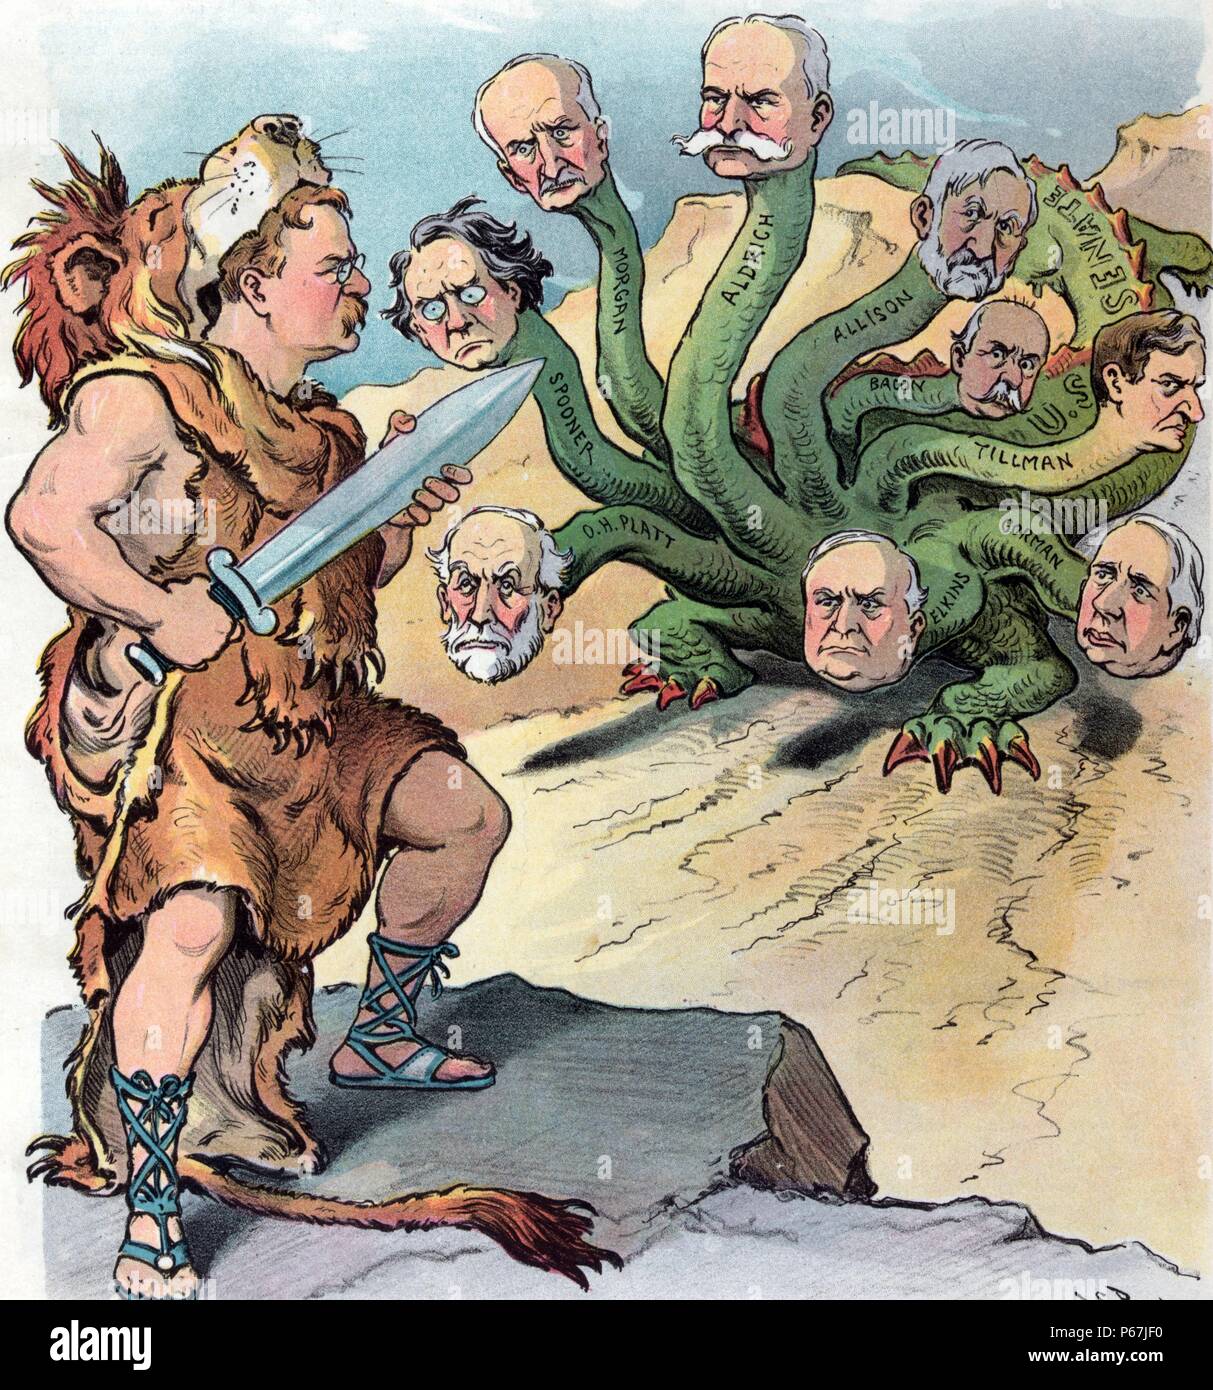 A herculean task' Theodore Roosevelt as Hercules wearing a lion skin and holding a sword, facing a nine-headed hydra, each head identified as that of a senator, its tail labelled 'U.S. Senate'. Stock Photo